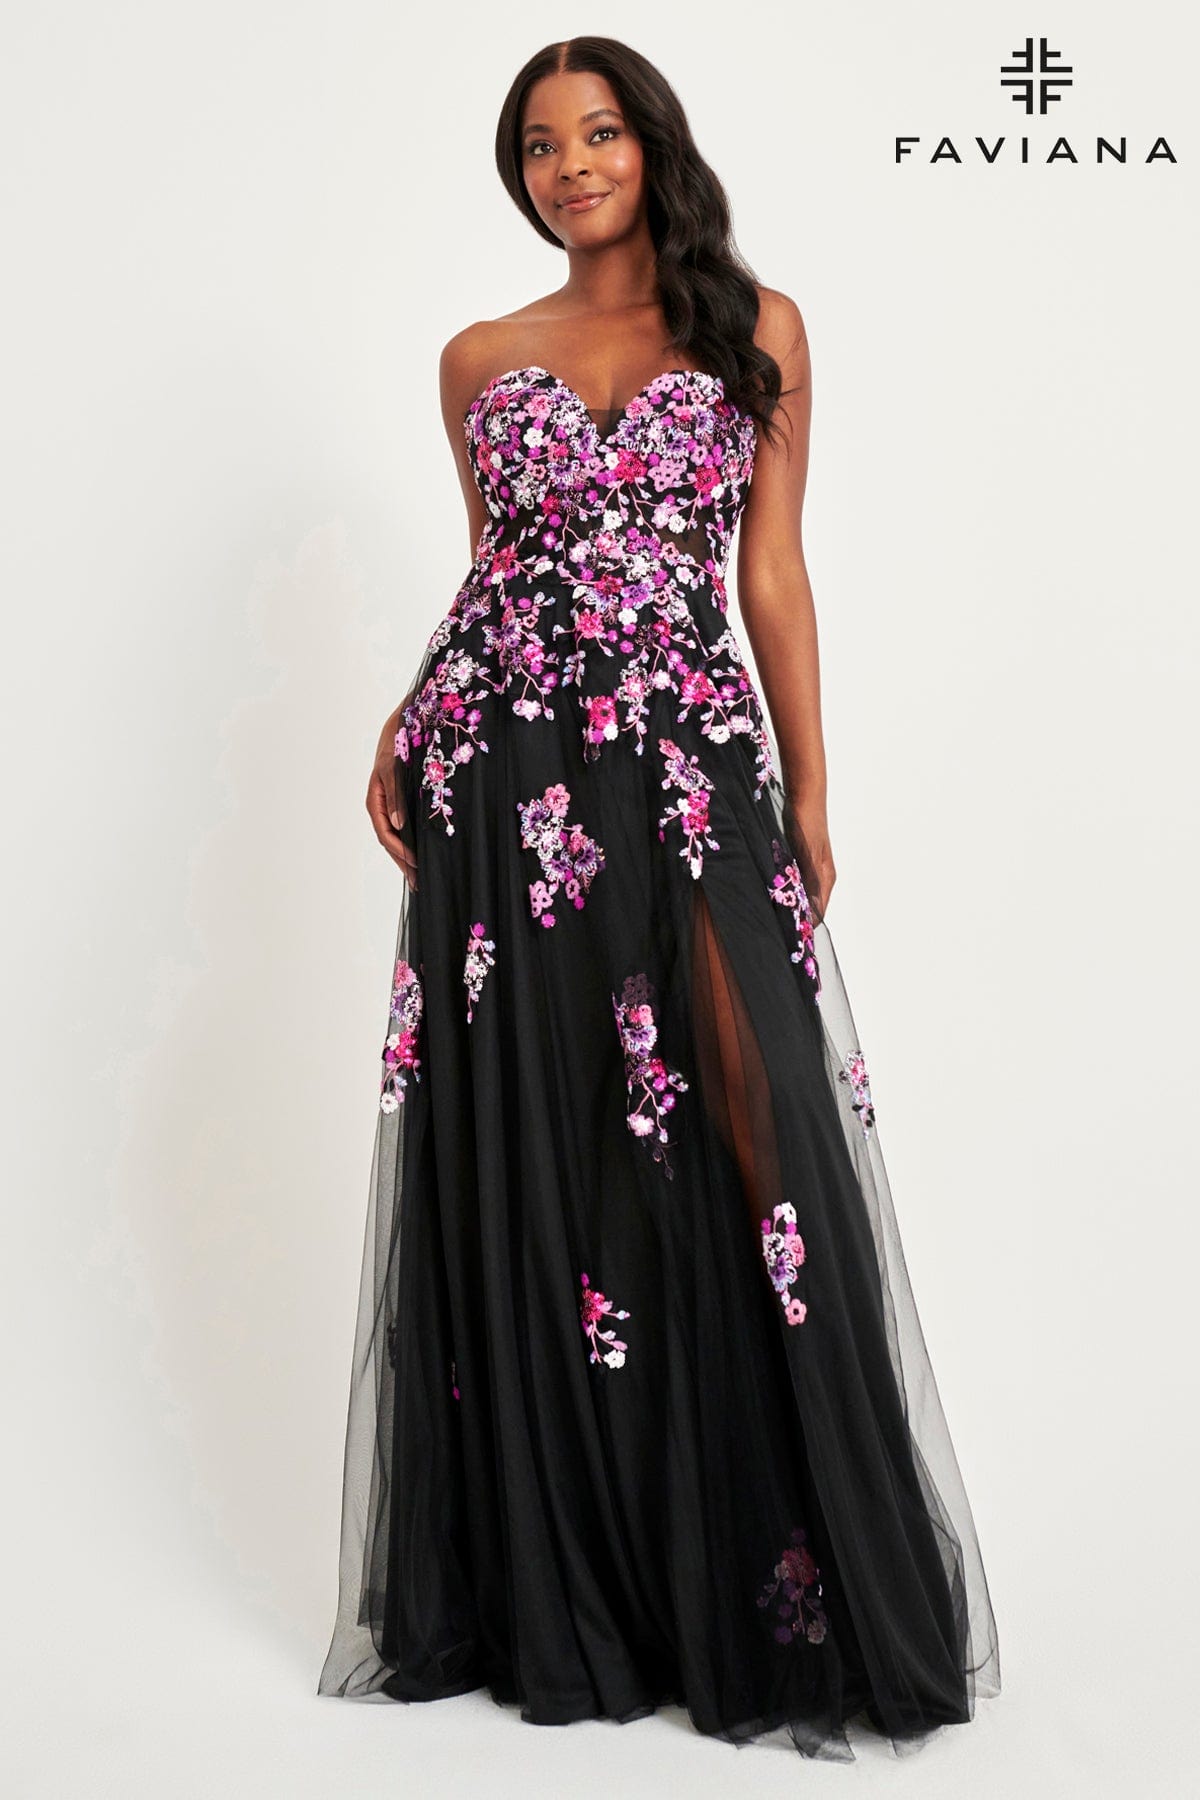 Fuchsia Strapless Corset Dress With Flowy Tulle Skirt And Floral Applique | 11028